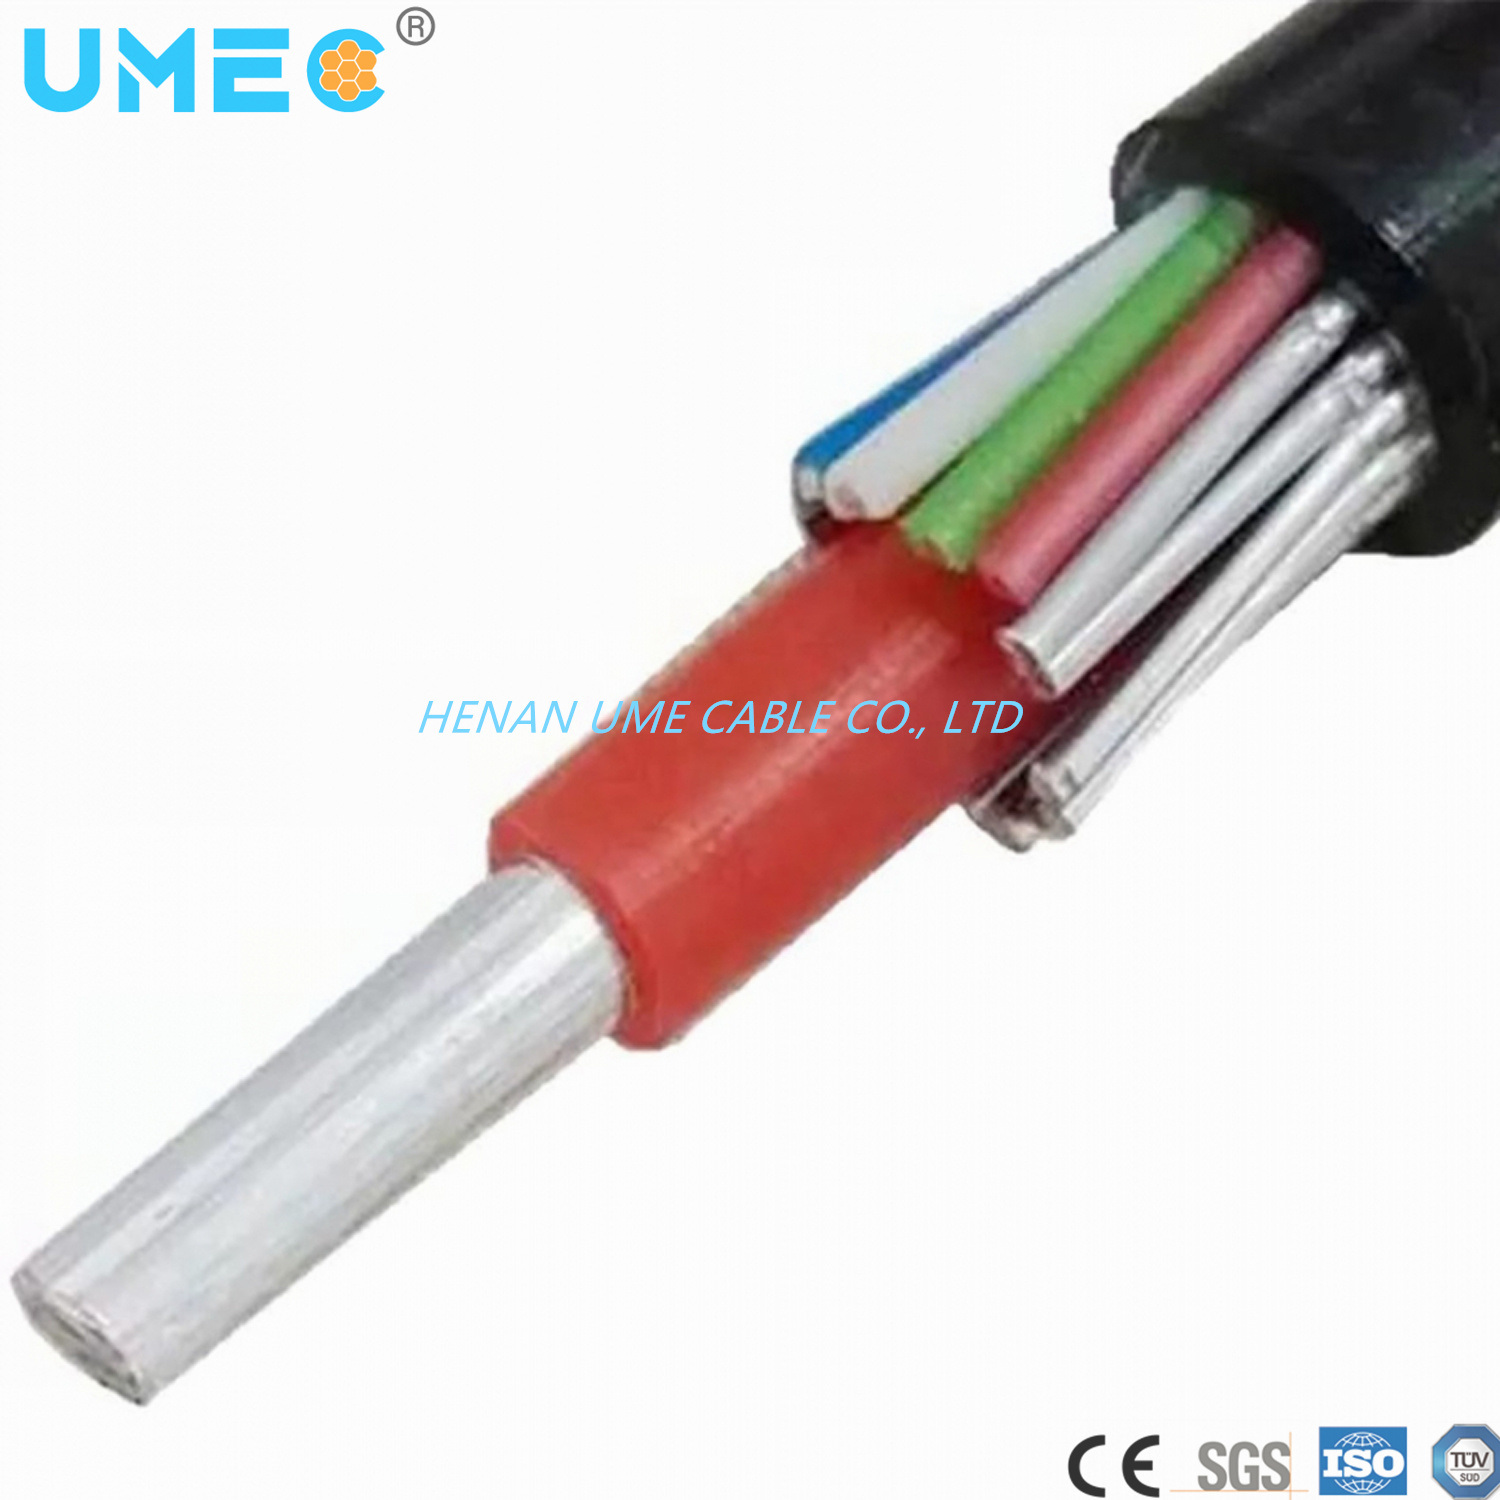 Two Concentric Conductors Coaxial Cable